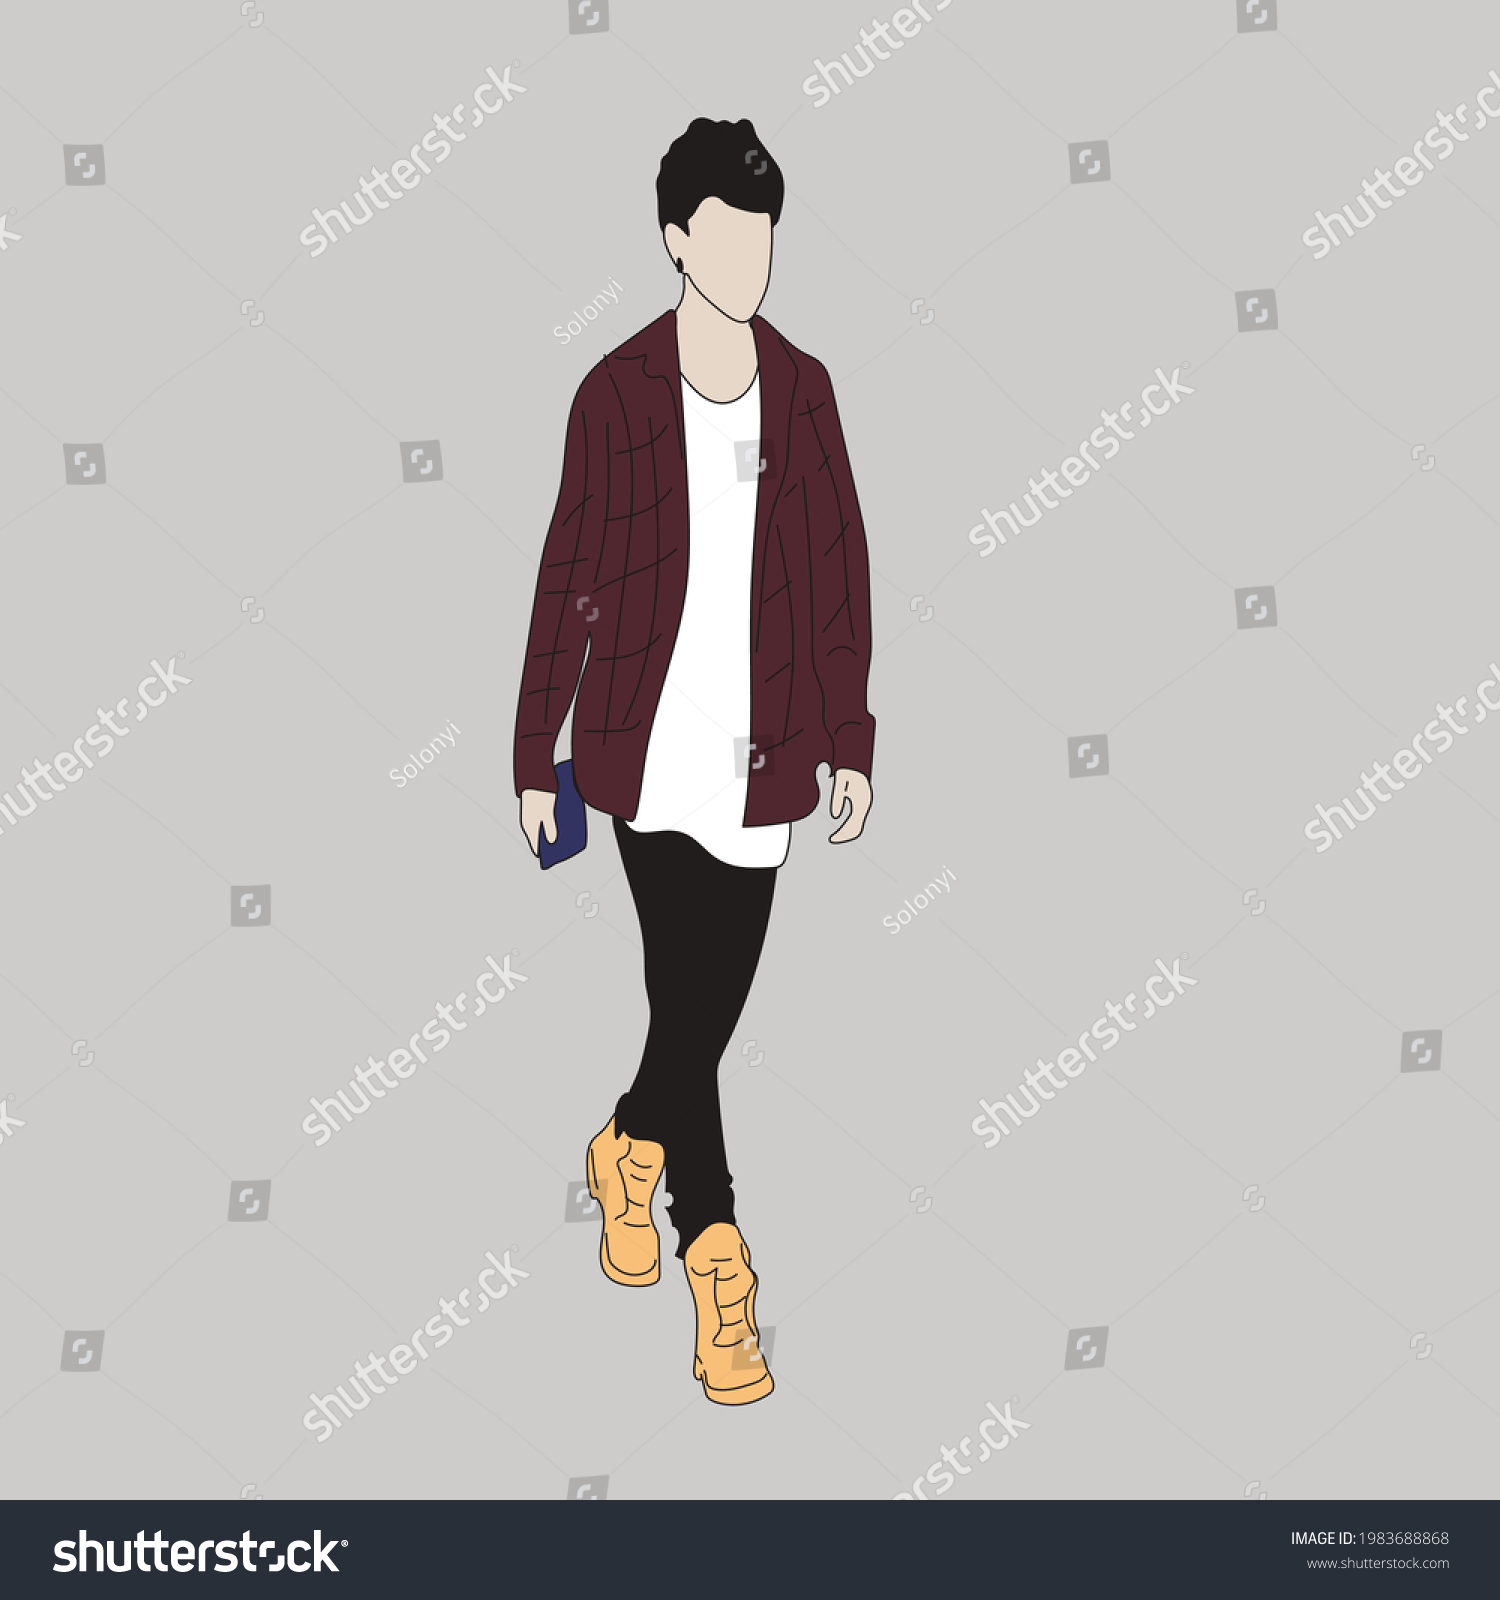 SVG of Vector illustration of Kpop street fashion. Street idols of Koreans. Kpop men's fashion idol. The guy in the maroon shirt in the black pants. svg